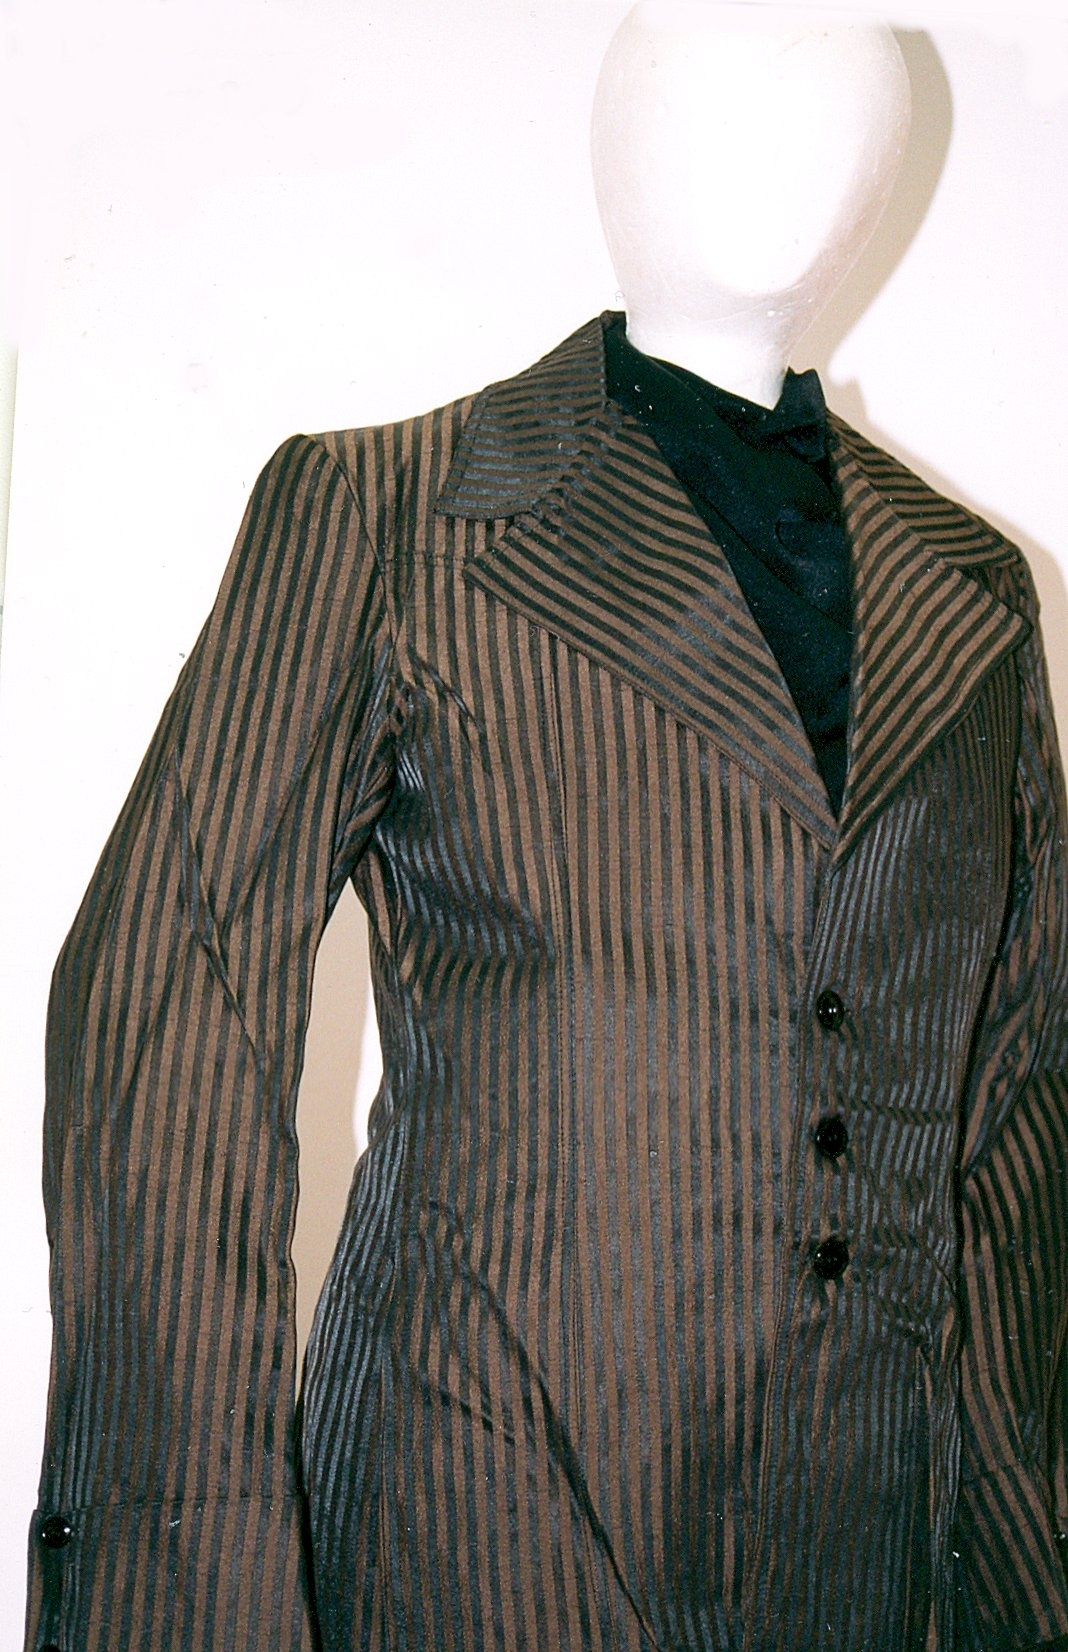 Black and tan stripe men’s single-breasted jacket  A black and tan stripe men’s single-breasted jacket epitomises the Teddy Boy look of British subculture in the 1950s where young men copied Edwardian-era fashion. Canterbury Museum 1984.70.15